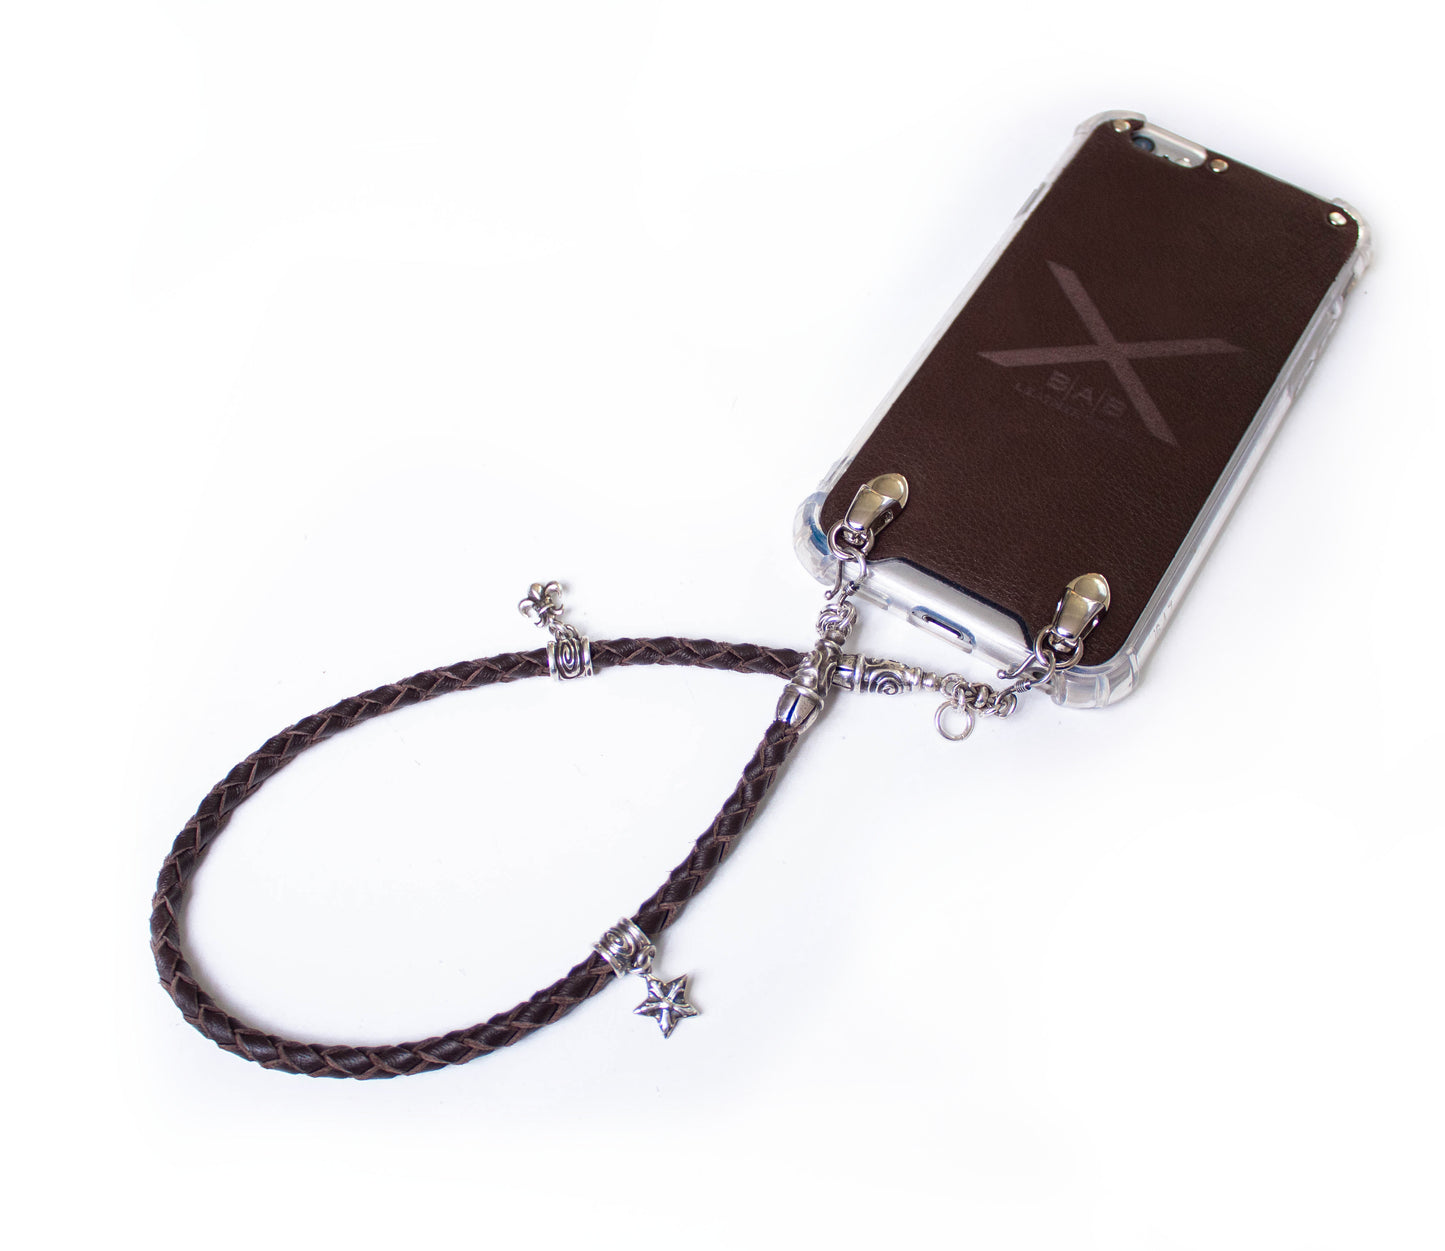 Full-Grain Genuine vegetable-tanned Leather & 925 Sterling Silver Case for iPhone. Brown Genuine Leather Bracelet/Choker/Strap 4 hand-braided strands.- F02